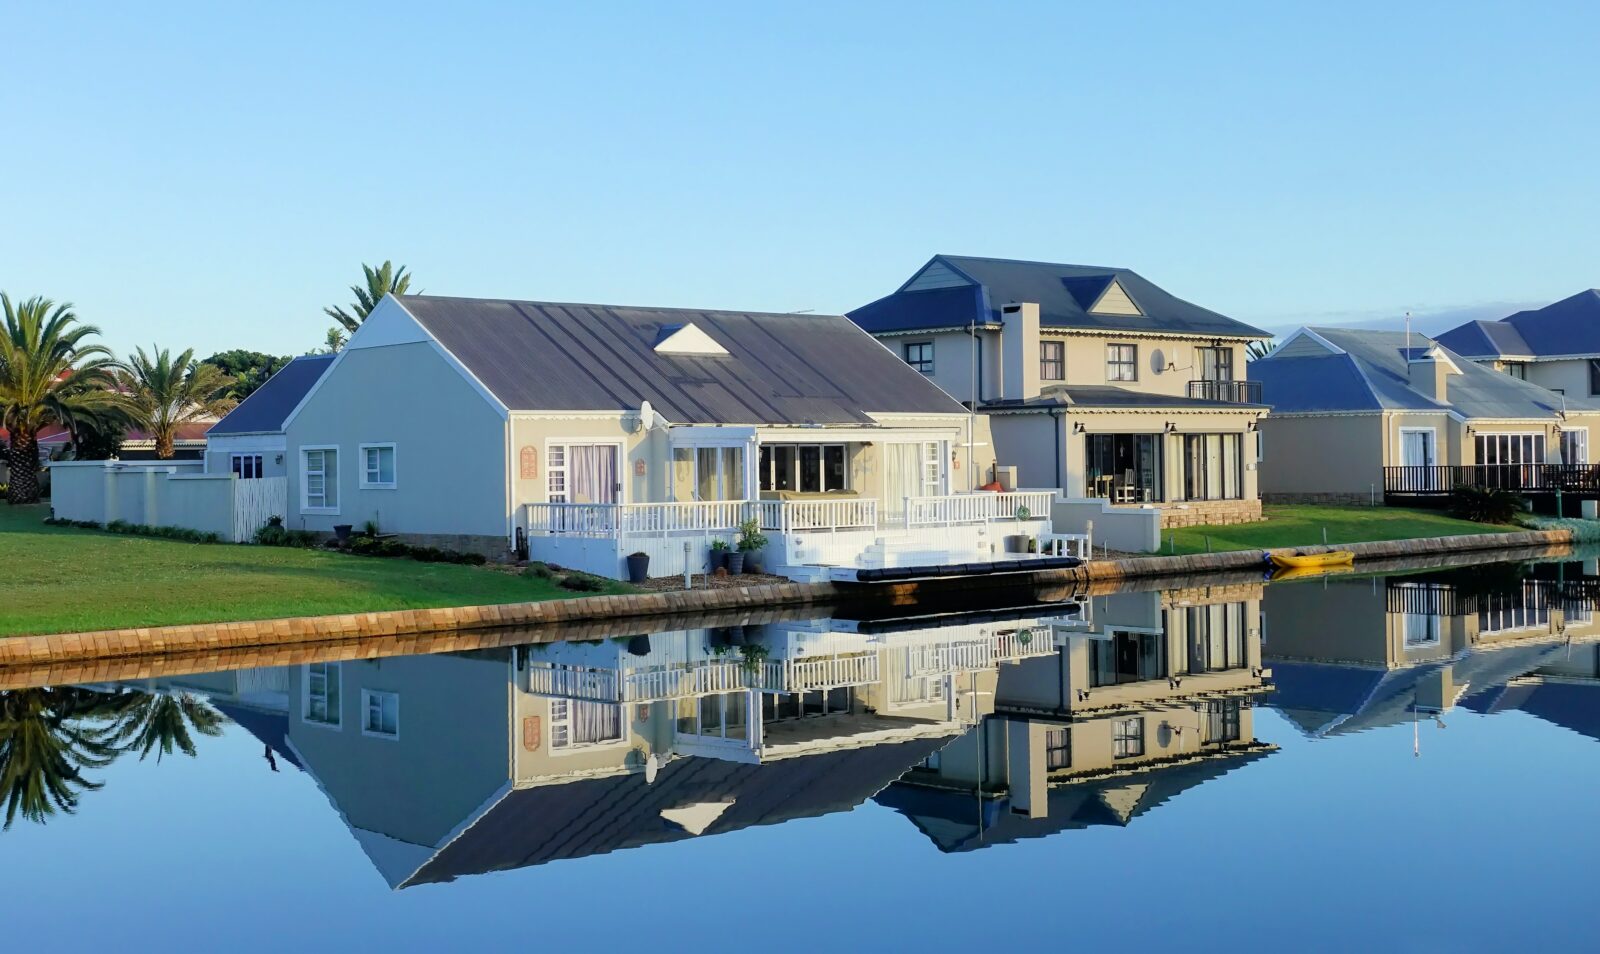 Waterfront bungalow